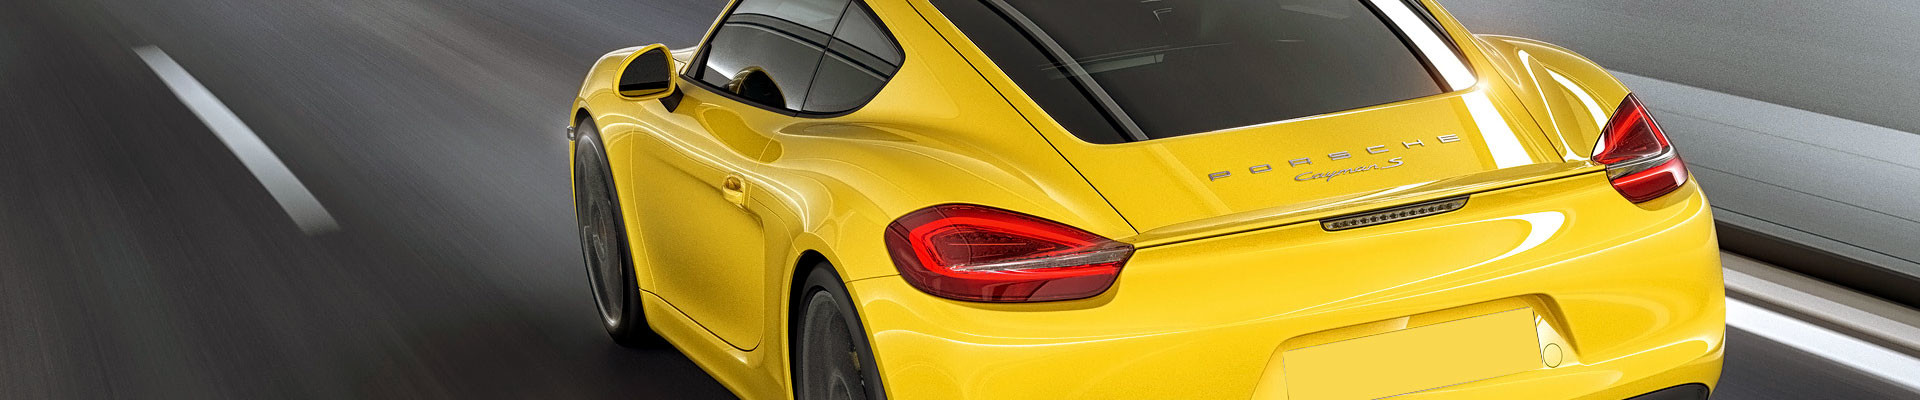 Porsche Cayman 981 maintenance or service schedule with details of the time and mileage intervals and service or maintenance items to replace. We include the Porsche maintenance schedule and some additional recommended maintenance intervals for your 981 Cayman.